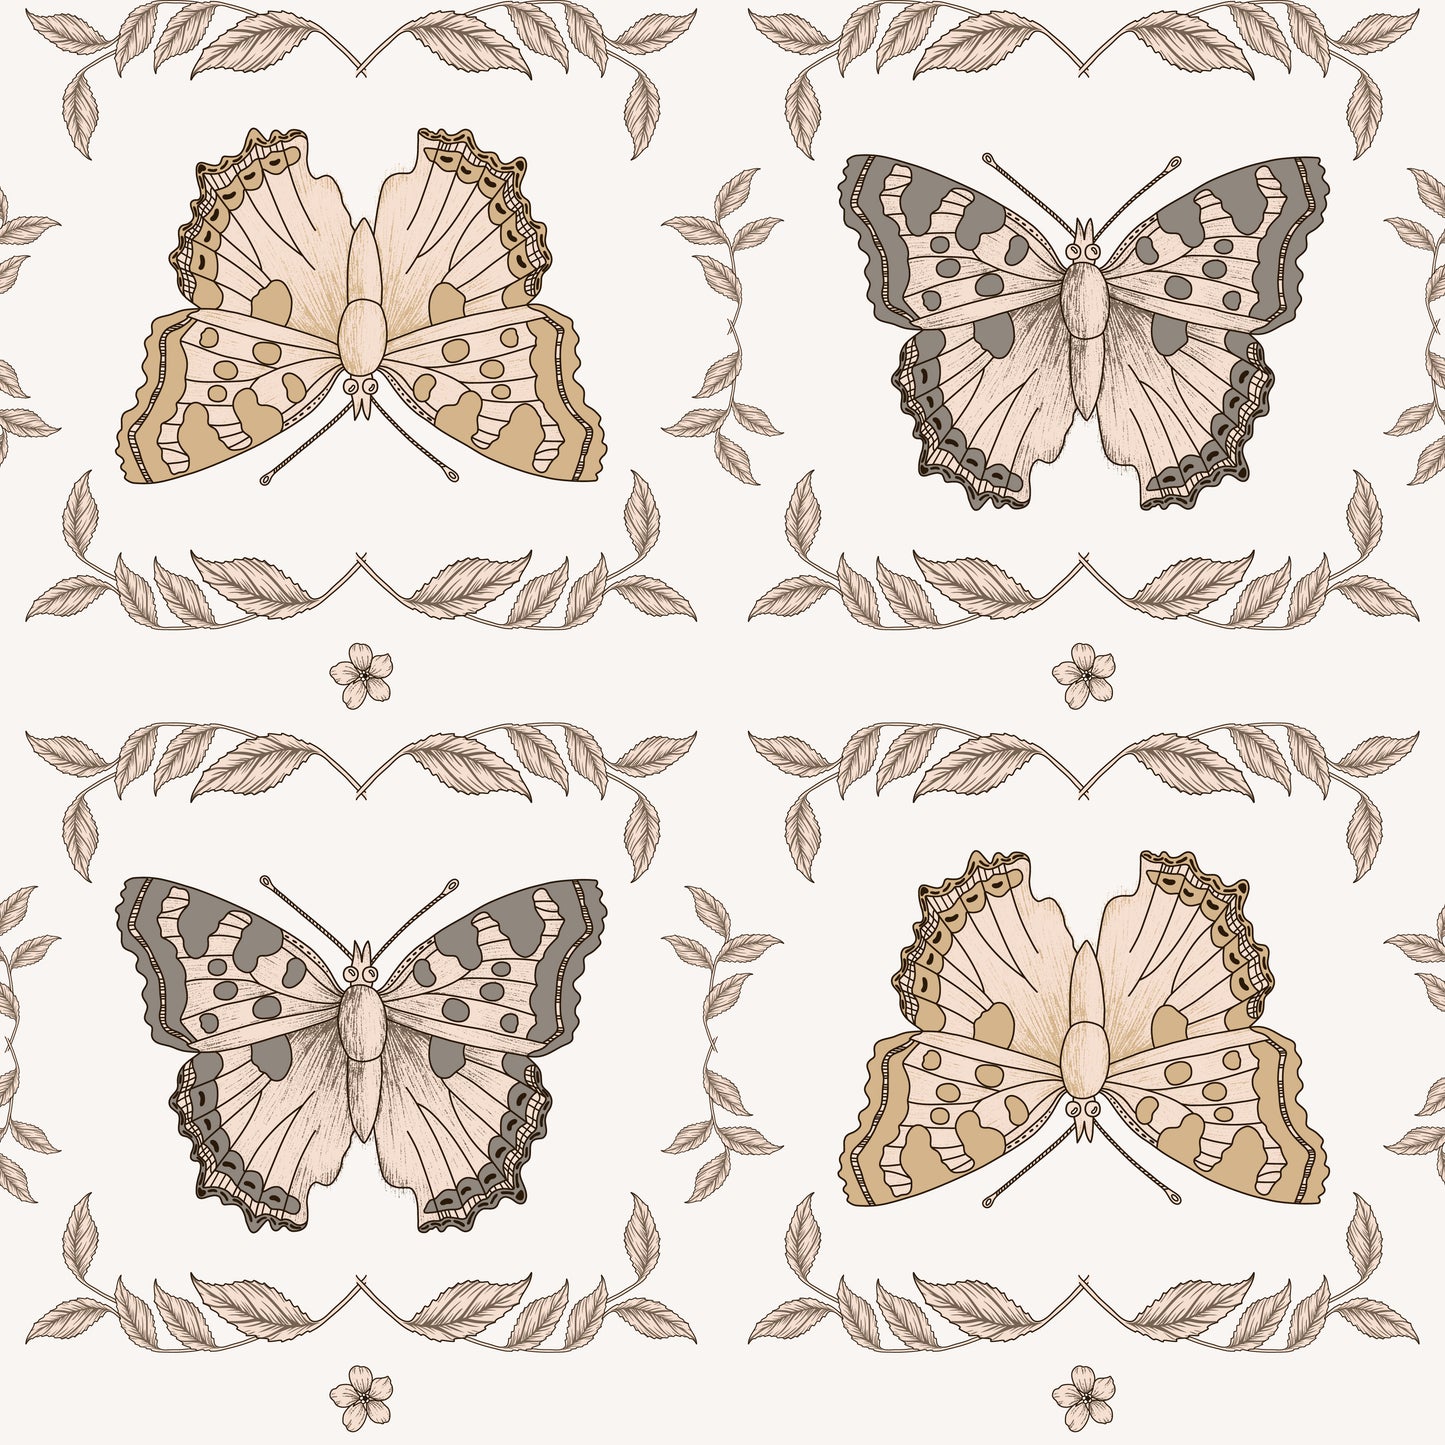 Neutral butterflies on white background easy to install and remove peel and stick custom wallpaper available in different lengths/sizes locally created and printed in Canada. Removable, washable, durable, commercial grade, customizable and water proof.